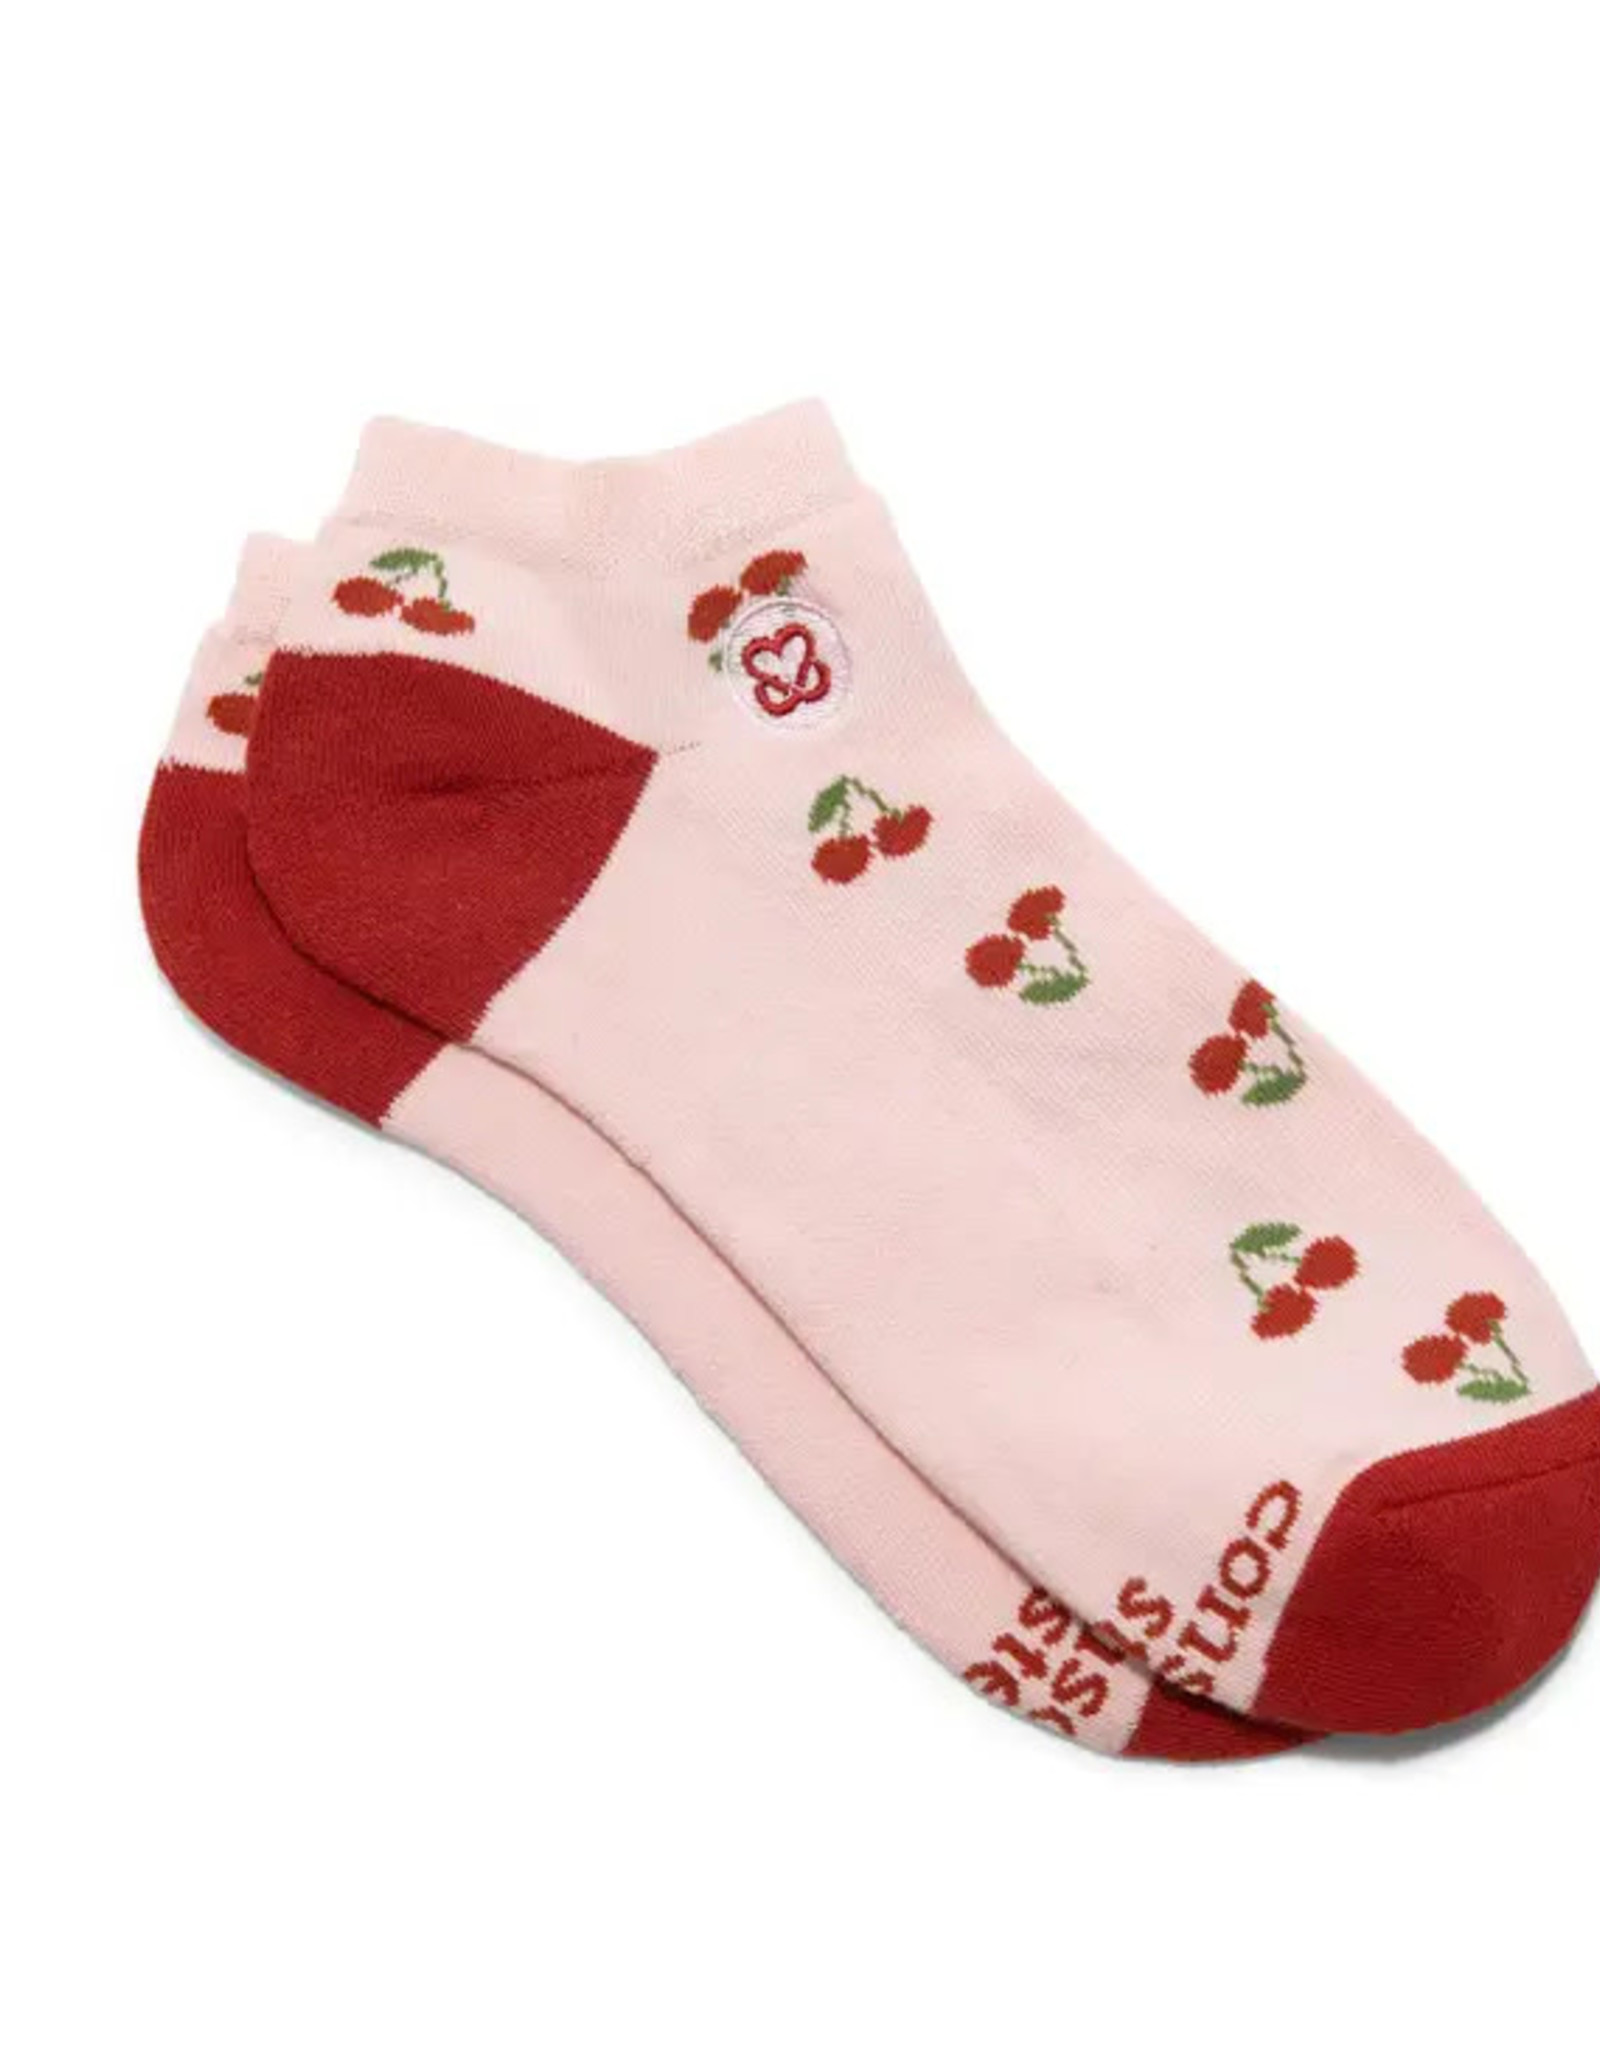 Conscious Step Ankle Socks that Support Self-Checks (Cherries)